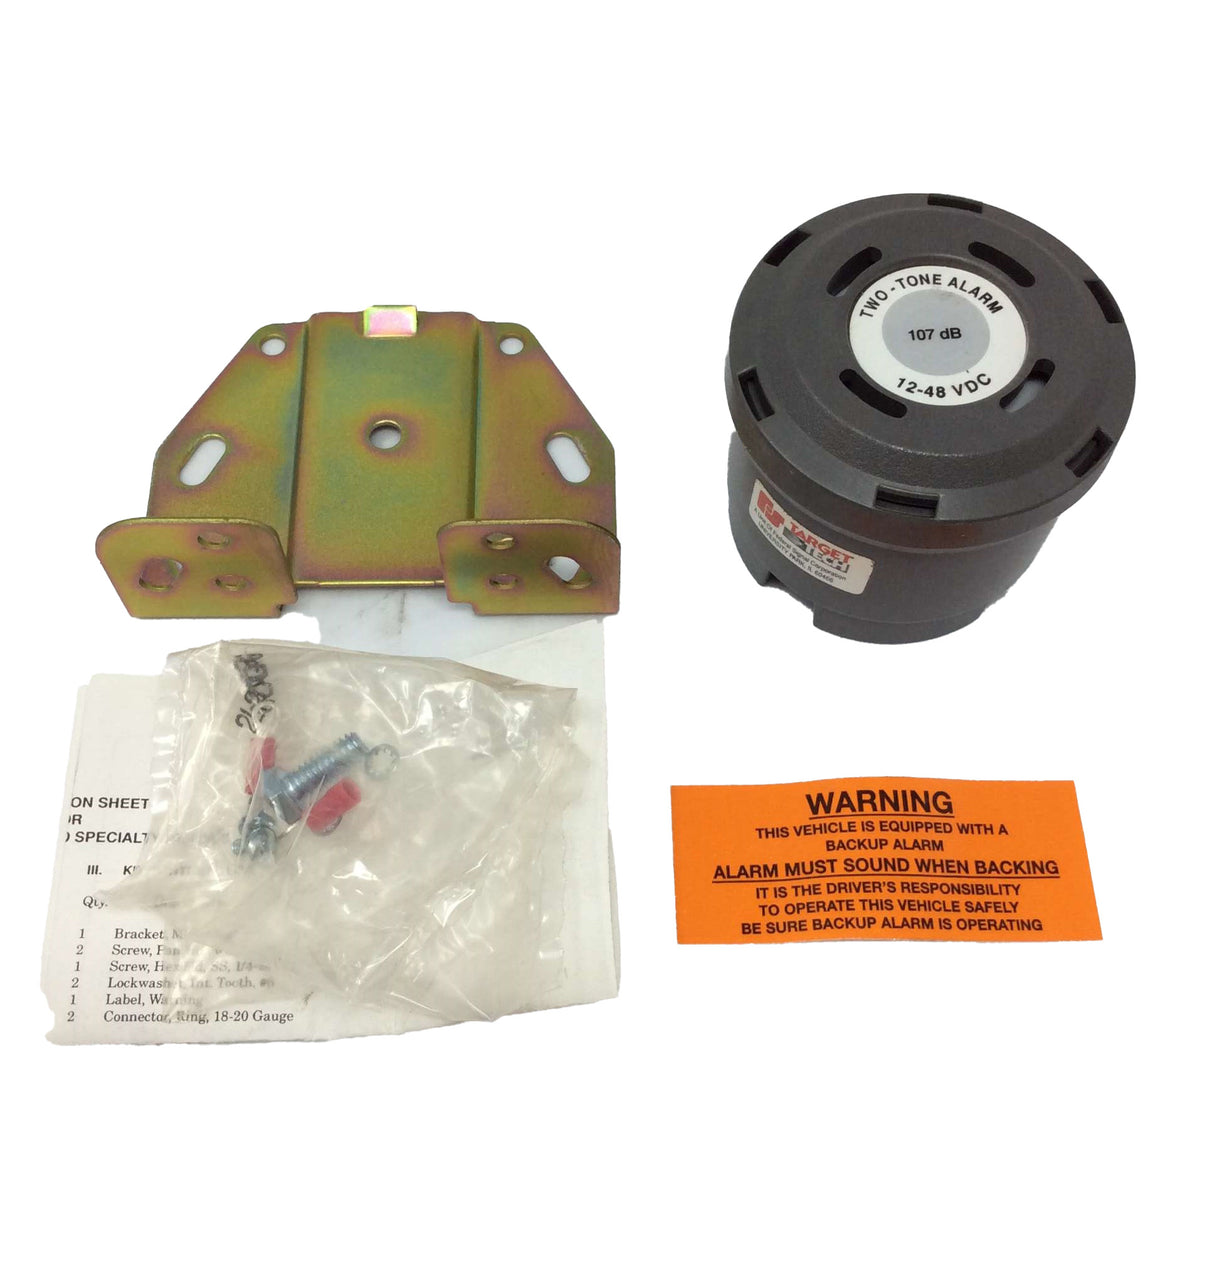 FEDERAL SIGNAL CORP ­-­ 210363 ­-­ TWO TONE BACK-UP ALARM 107DB 12-48VDC